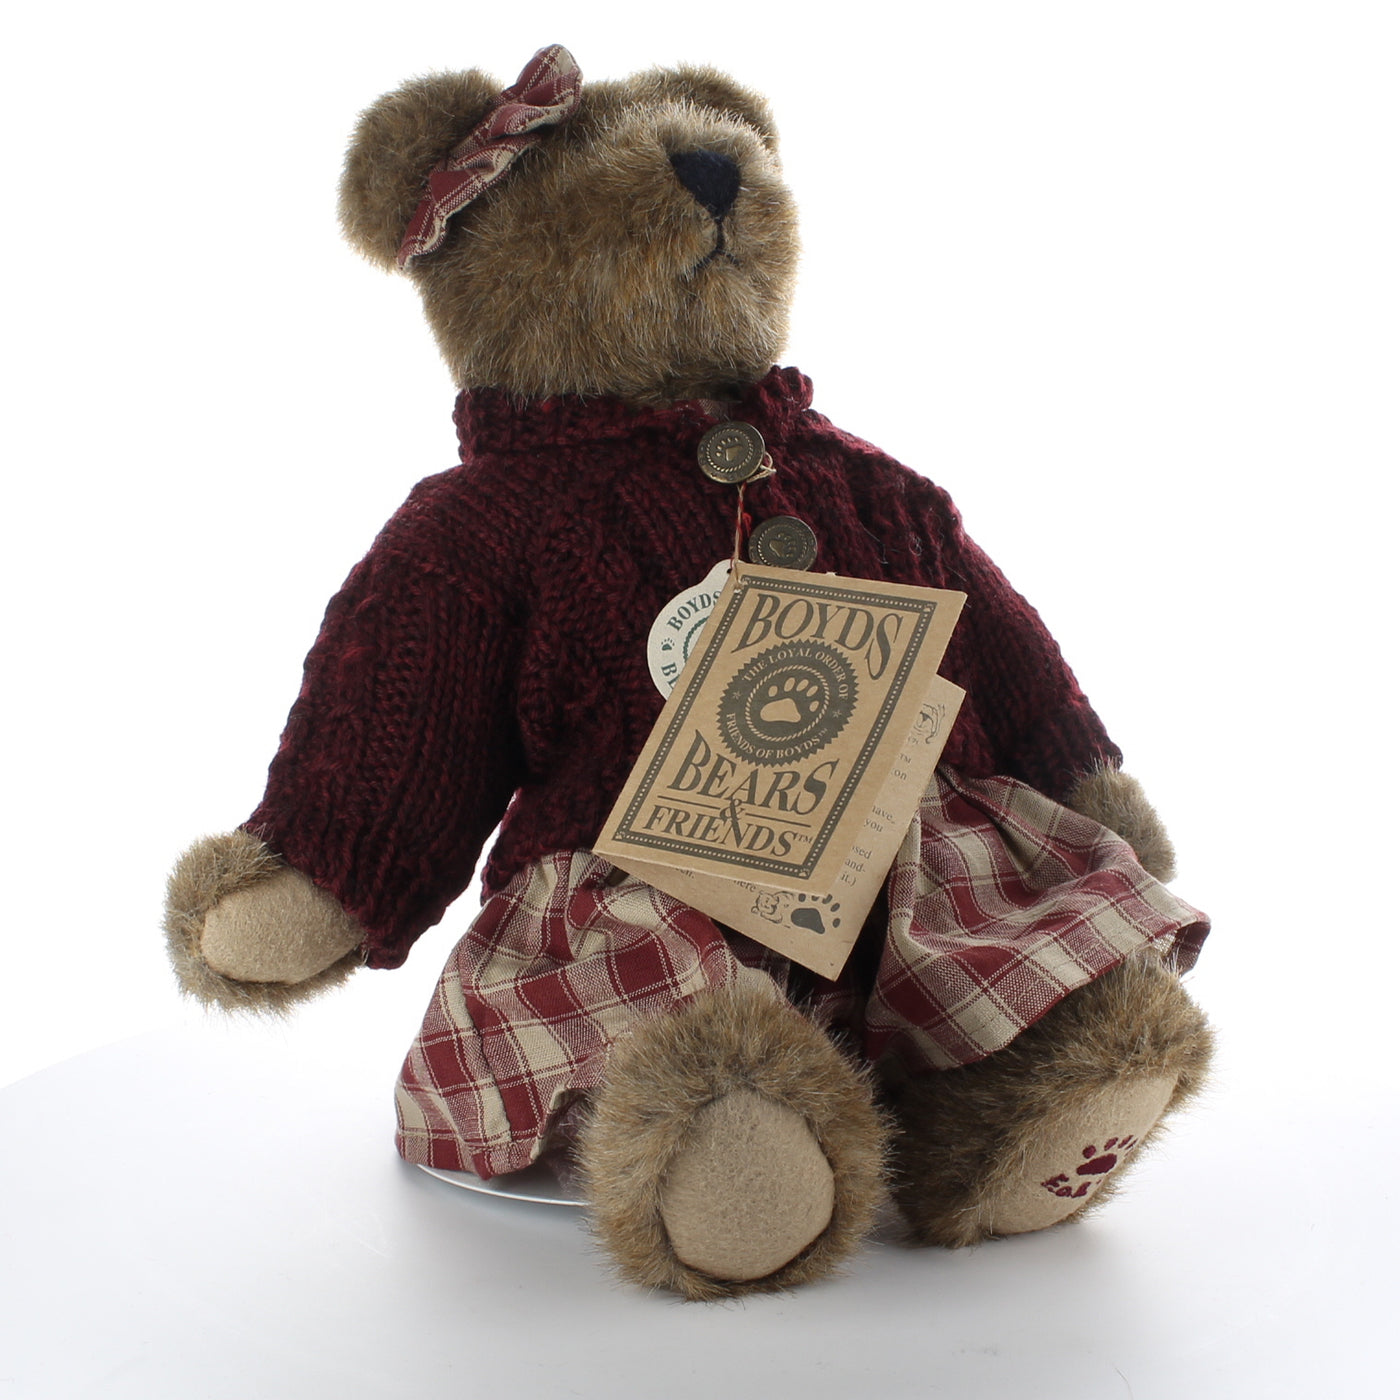 Boyds-Bears-&-Friends-Plush-Bear-bear-with-maroon-sweater-gingham-dress-and-bow